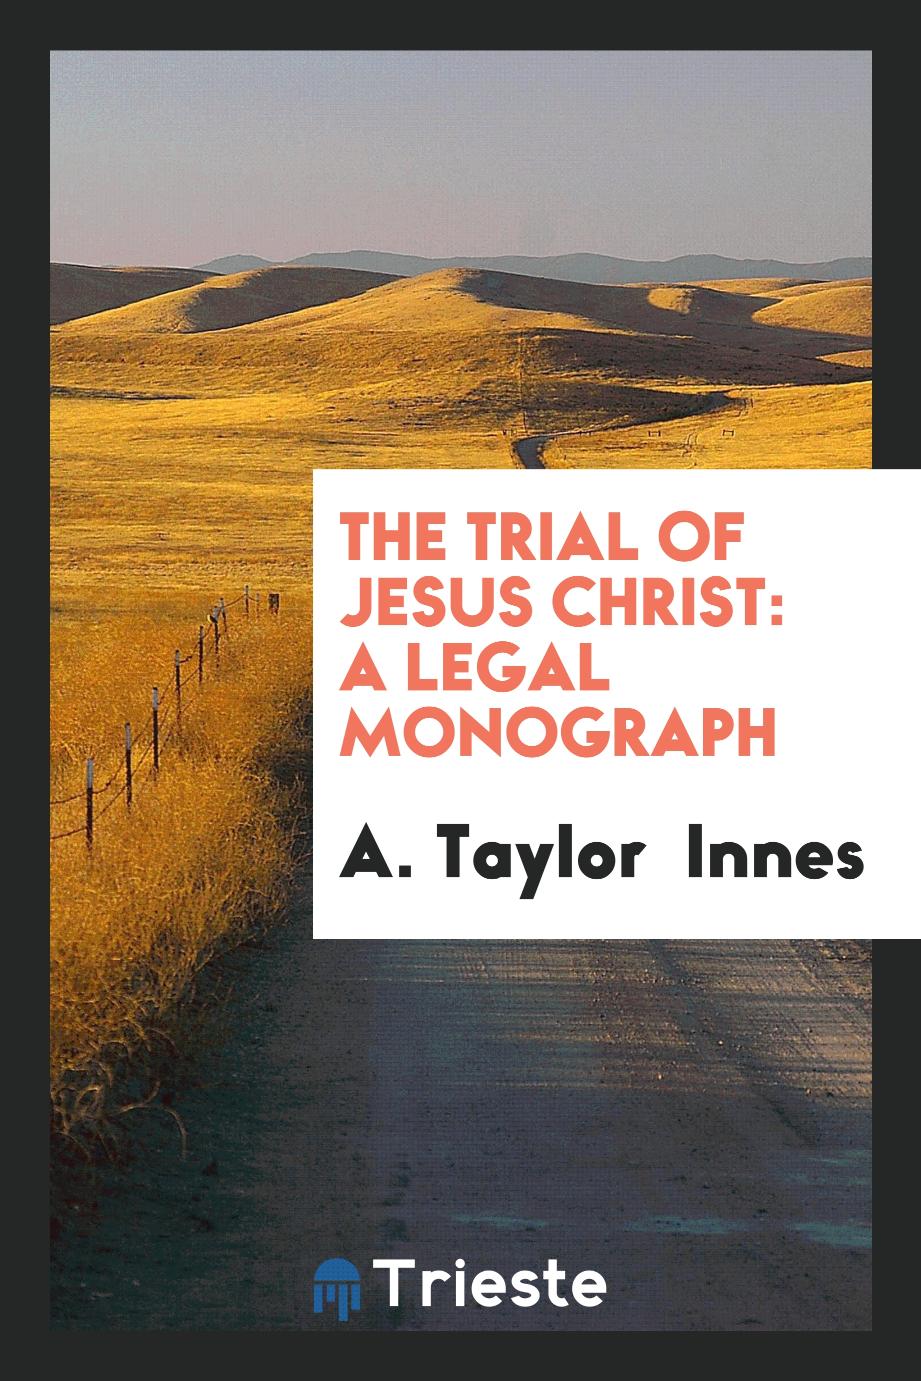 The Trial of Jesus Christ: A Legal Monograph